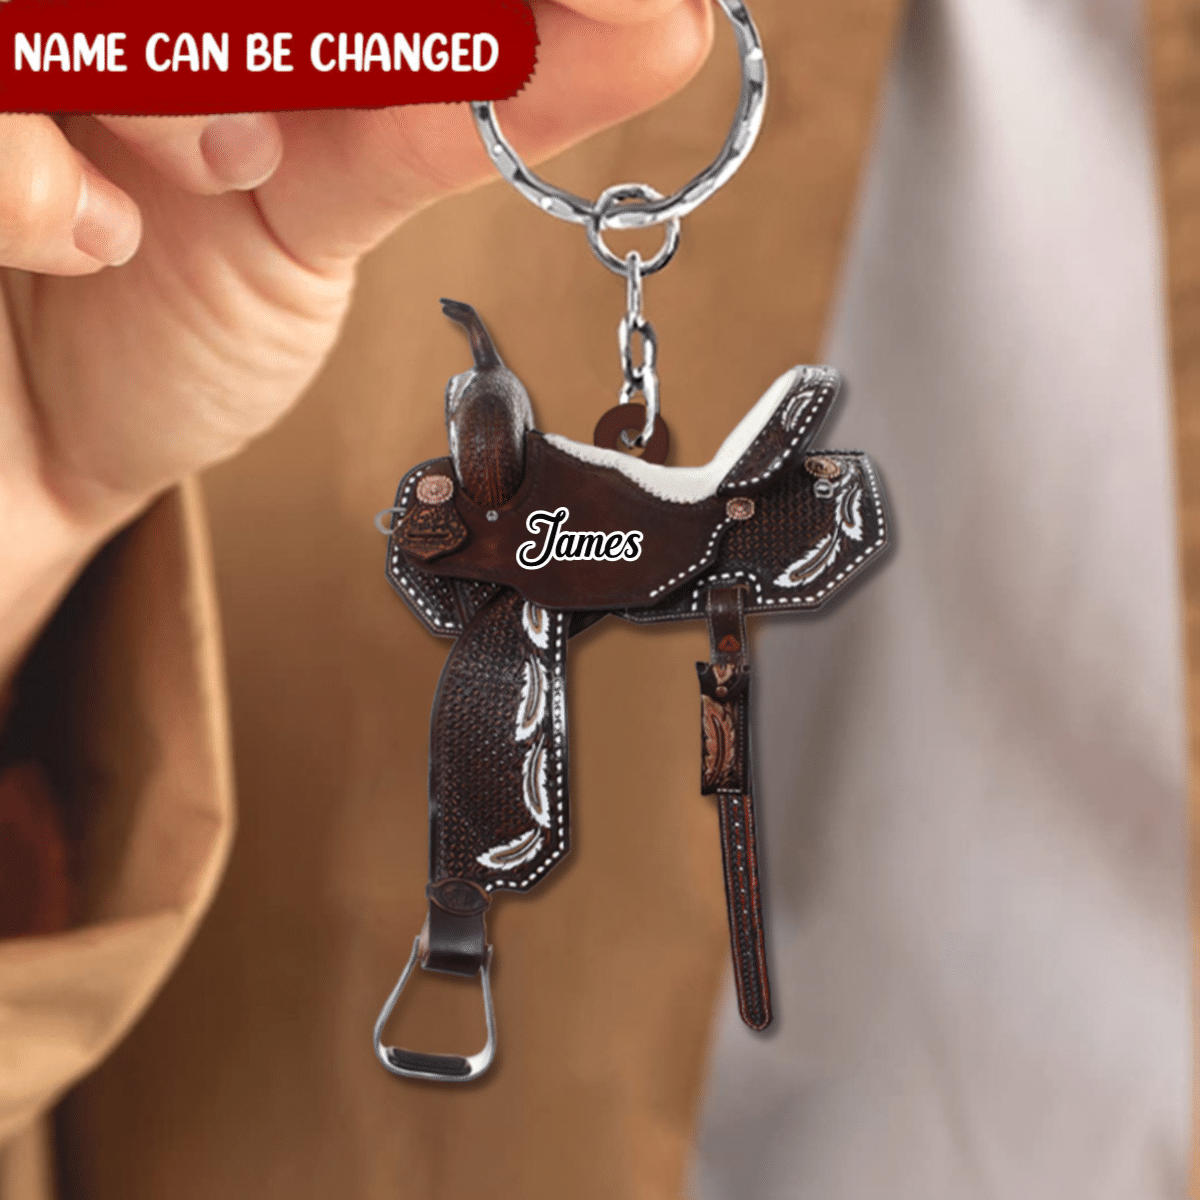 Horse Saddle/ Personalized Cowboy Keychain/ Cowgirl Acrylic Keychain For Horse Lovers/ Name & Saddle Color can be changed